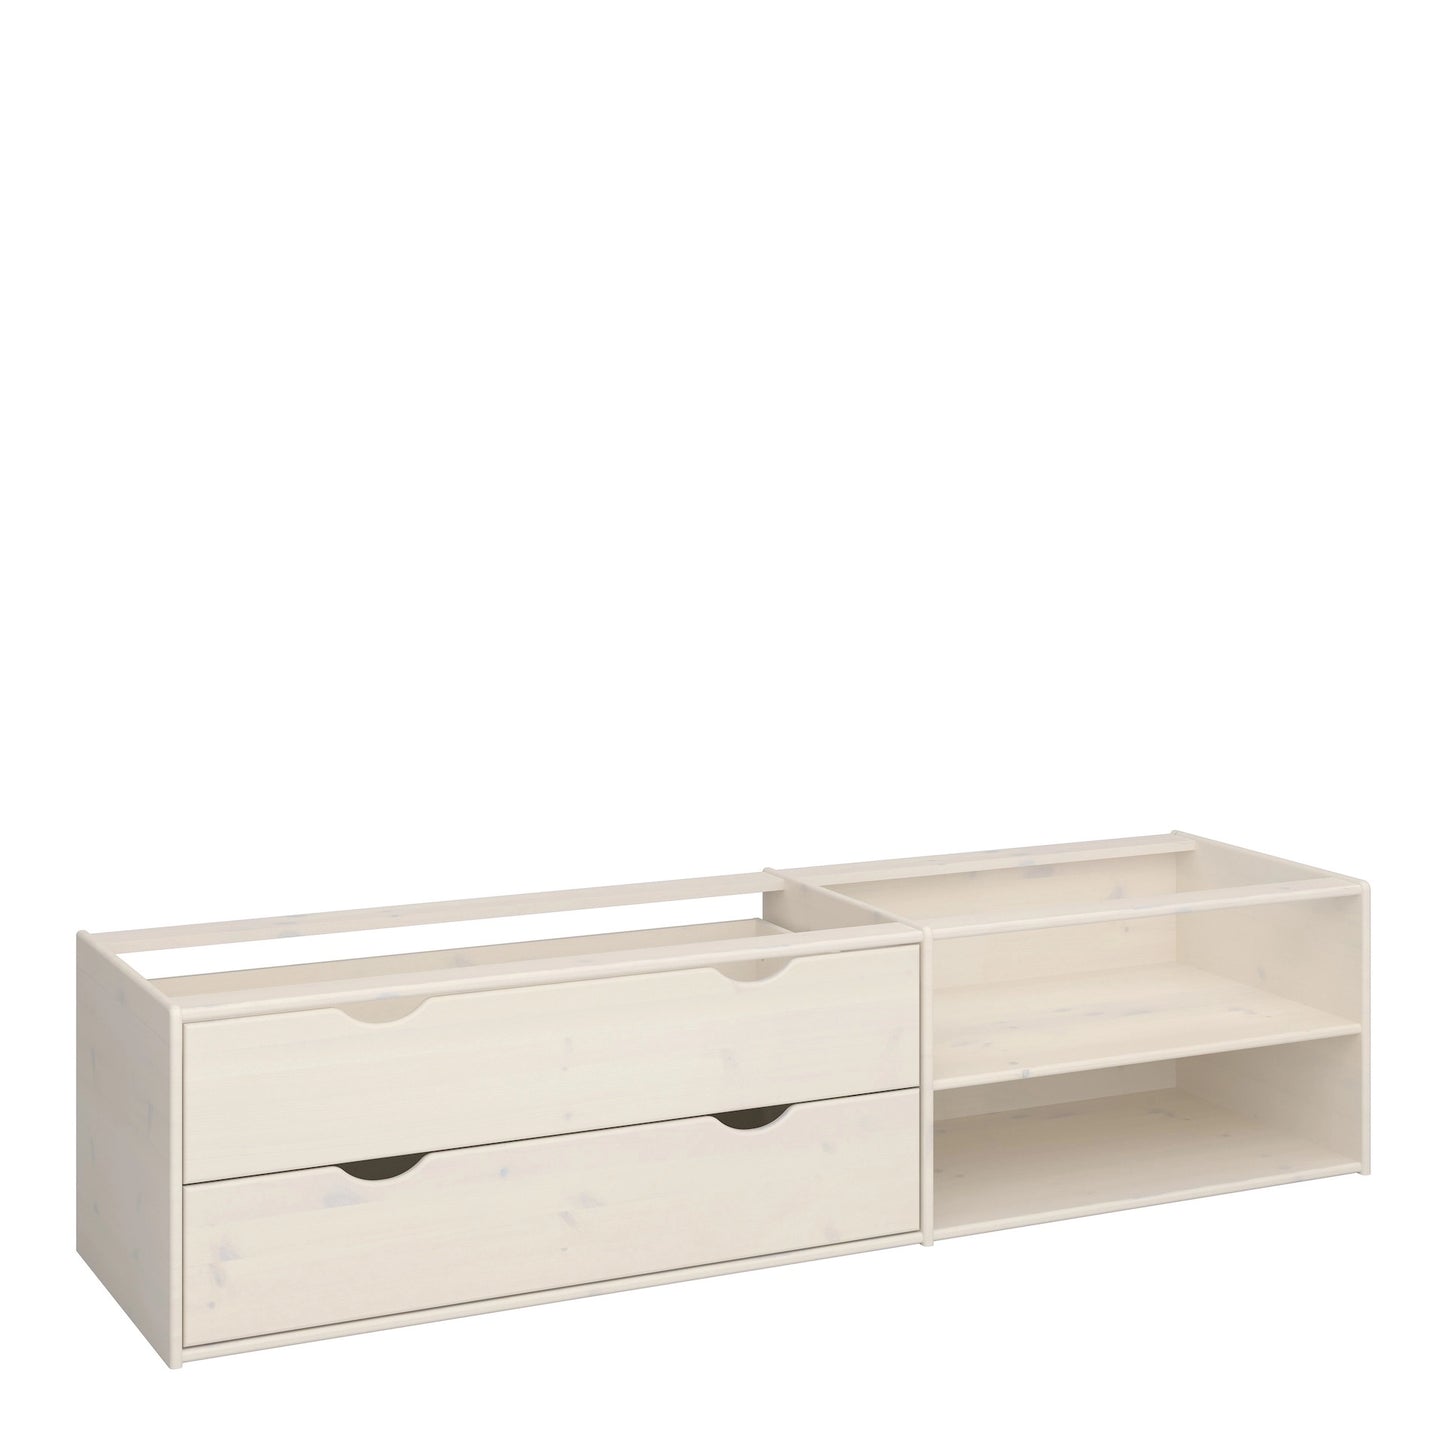 Furniture To Go Steens For Kids 3ft Single Bed, Includes - Under Bed Drawer Section 2 Drawers in Whitewash Grey Brown Lacquered